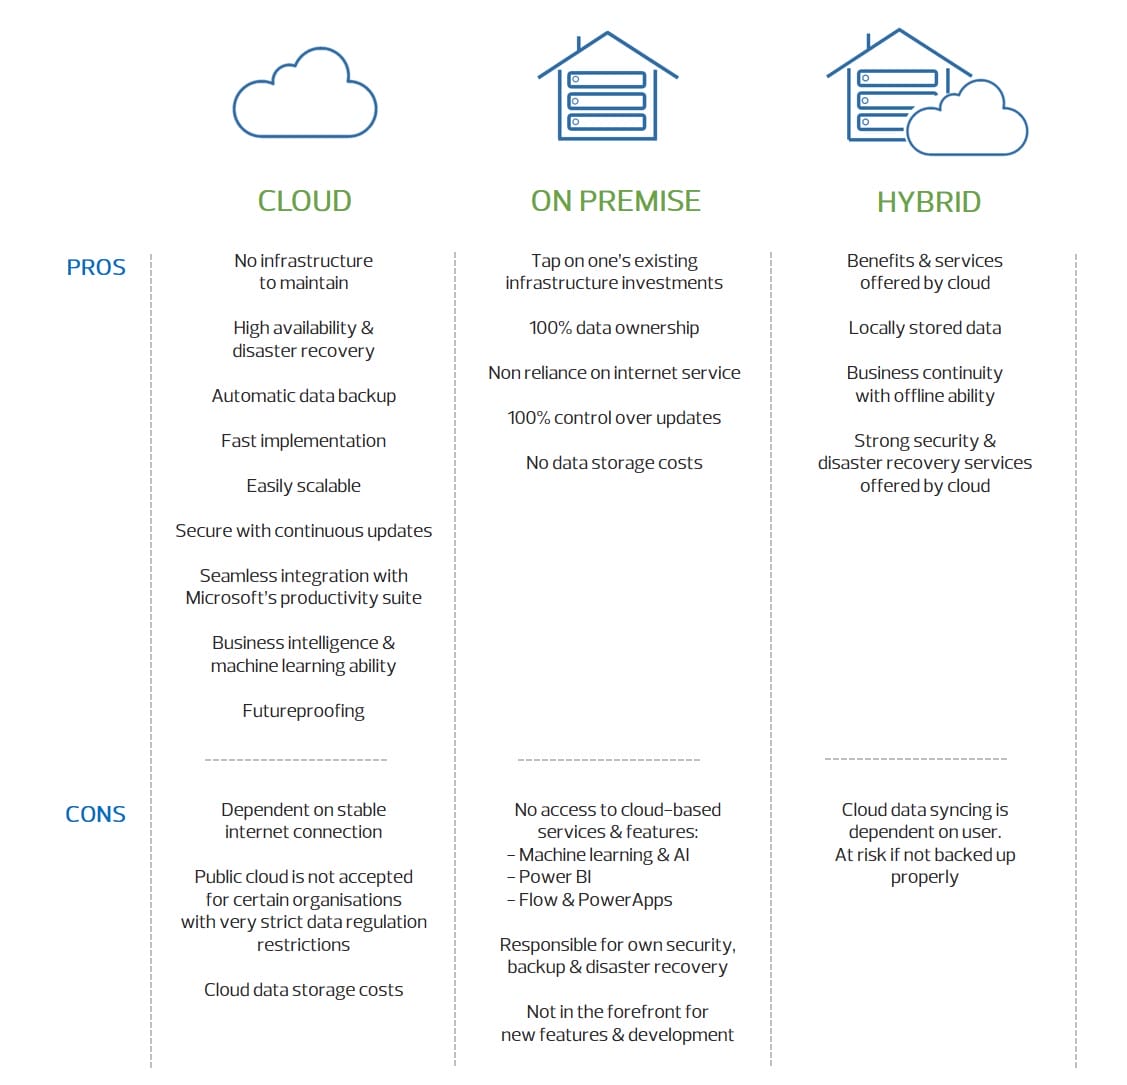 Comparison between the Pro and Cons of Cloud, On Premise and Hybrid Infrastructure